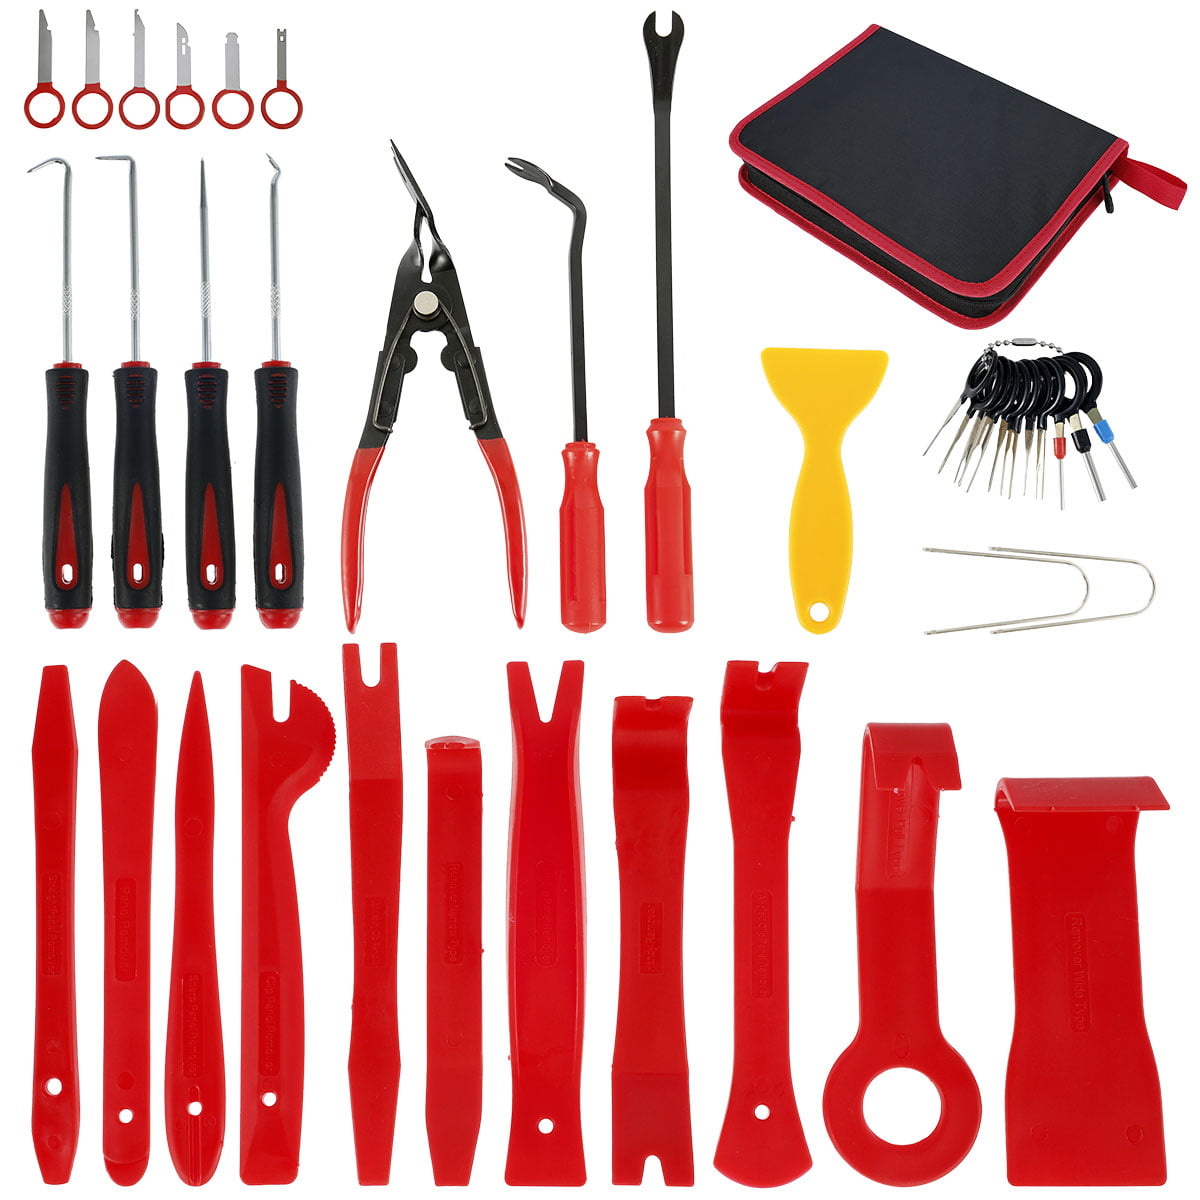 Car Door Open Pry Tool 13Pcs/Set Universal Panel Dash Trim Removal Installer Tool Maintenance Kits with Long Reach Grabber Wedges Inflatable Shim Bag 